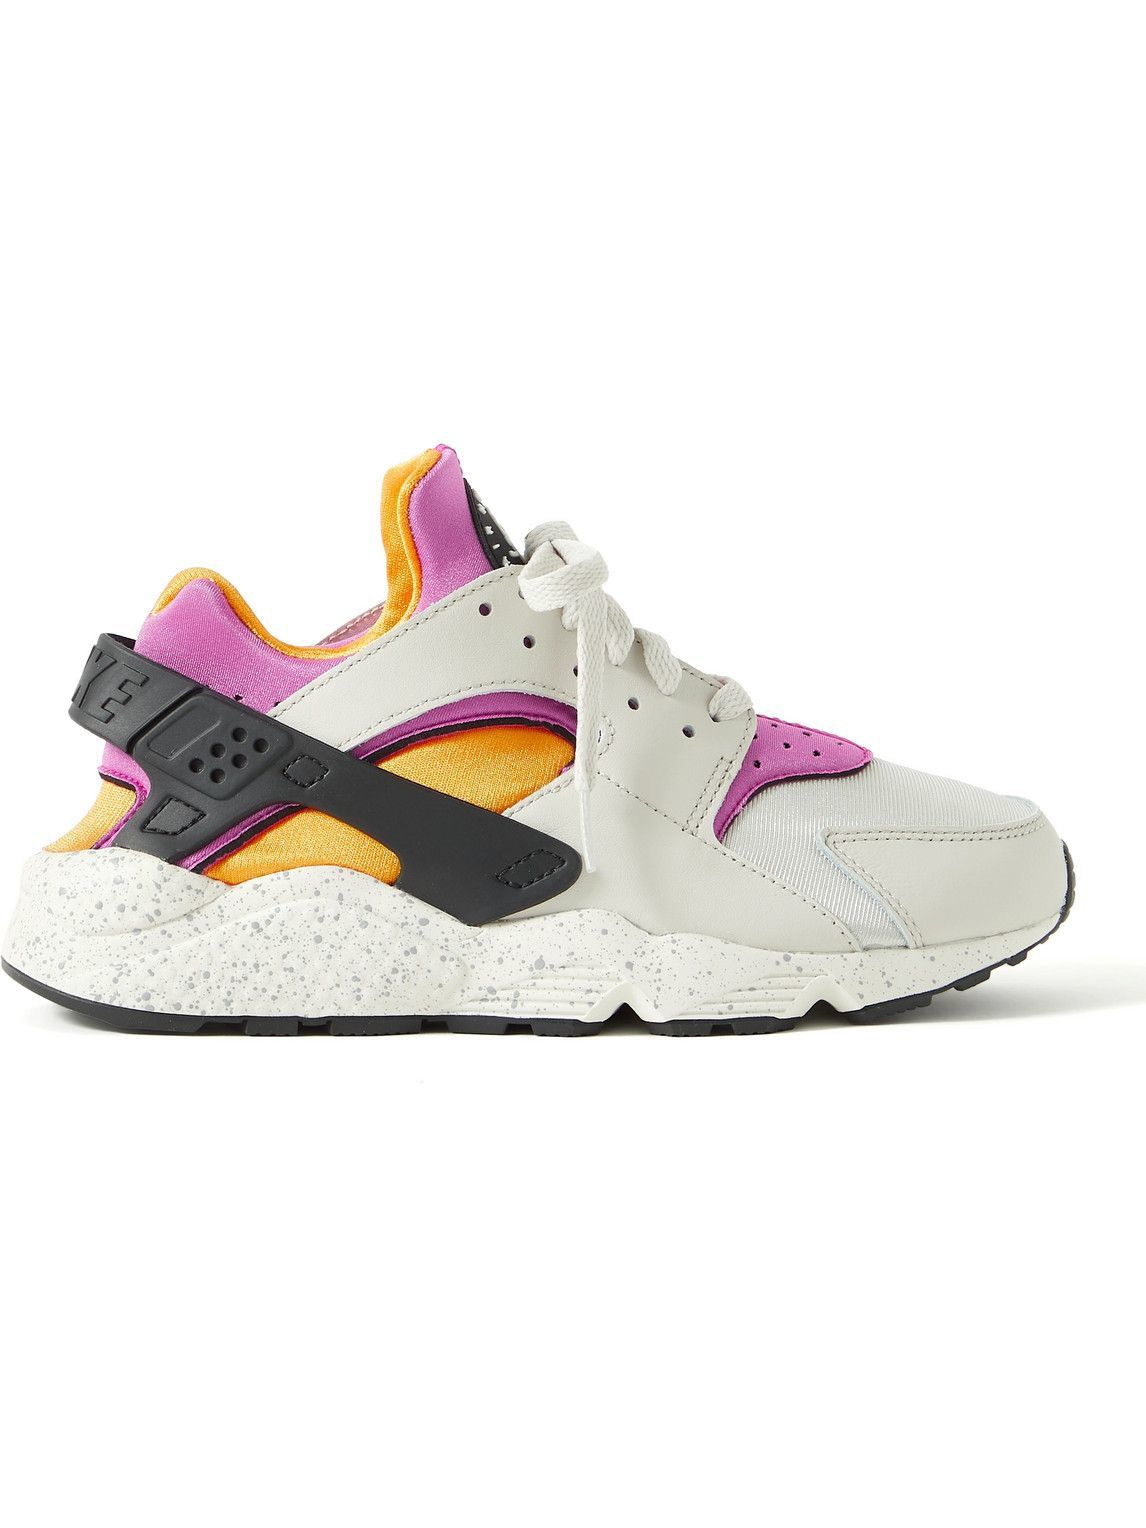 Nike Air Huarache Rubber-Trimmed Leather and Sneakers - White